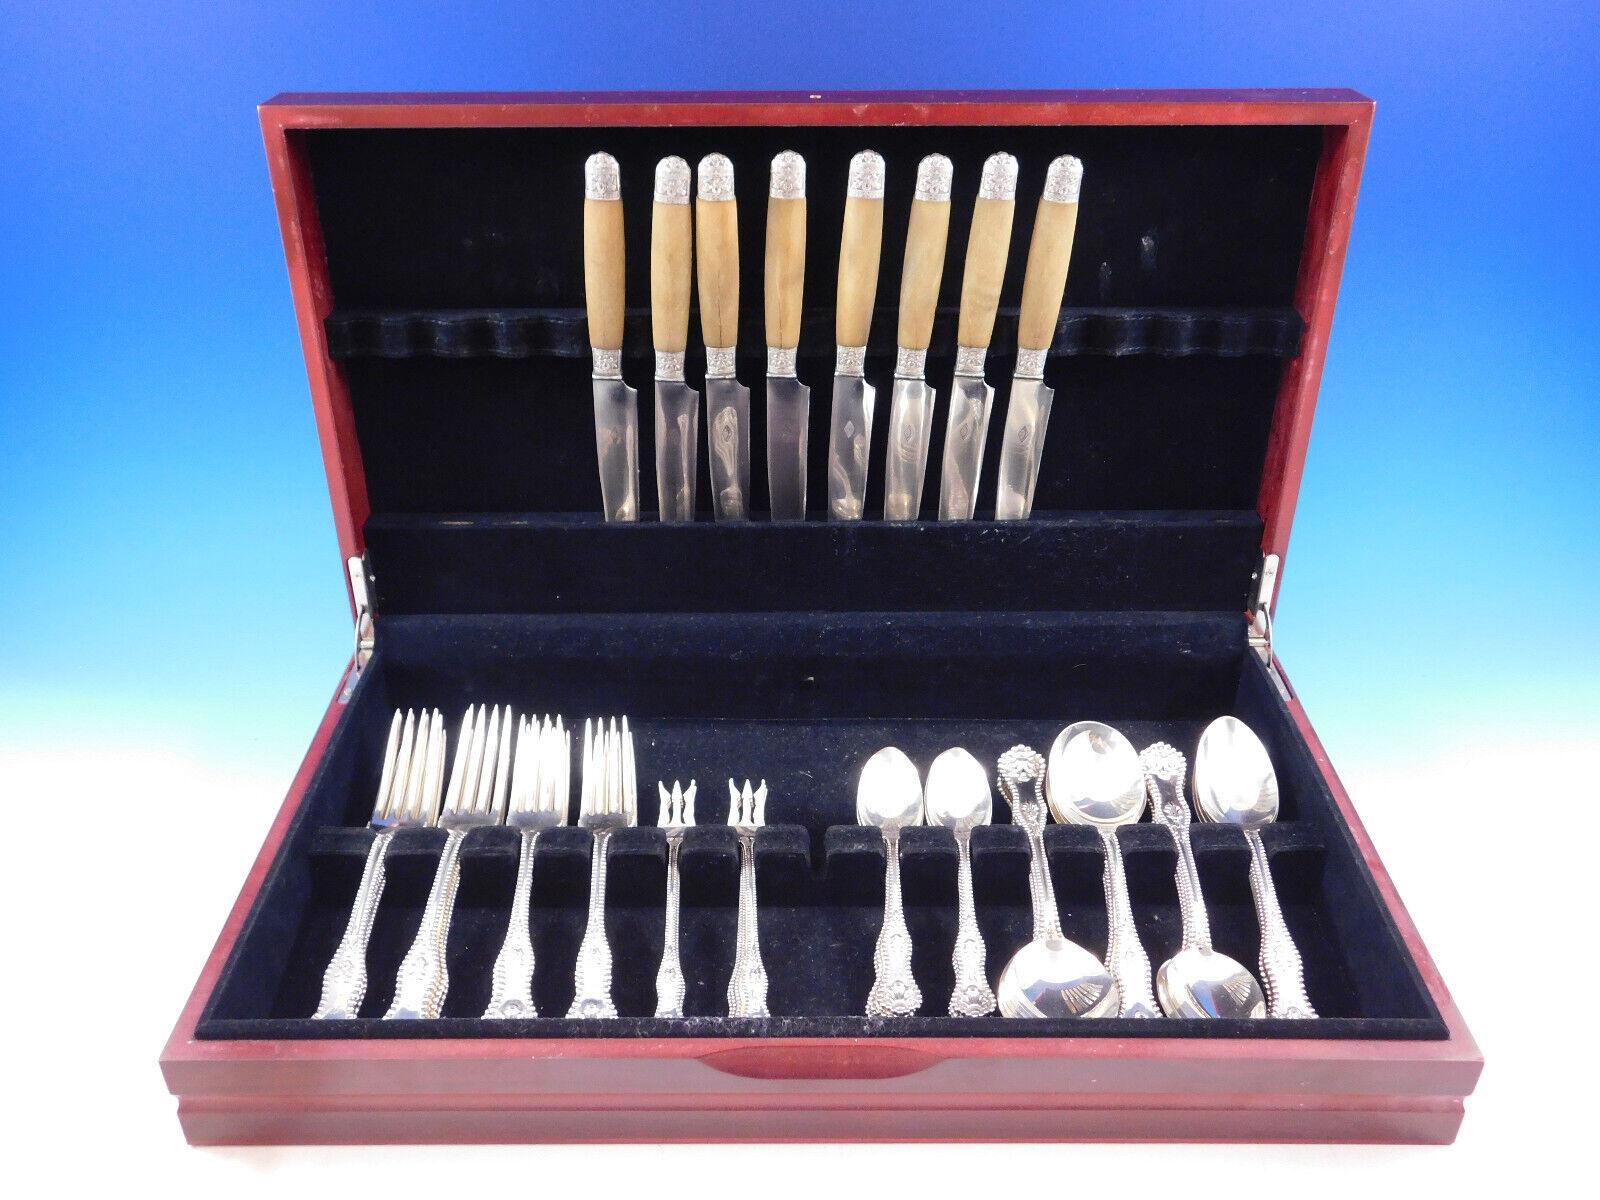 Rare Charles II by Dominick and Haff sterling silver Flatware set - 56 pieces, including 8 horn handle dinner knives. This pattern was introduced in the year 1894 and features a stunning beaded border and shell motif. This set includes:
 
8 dinner